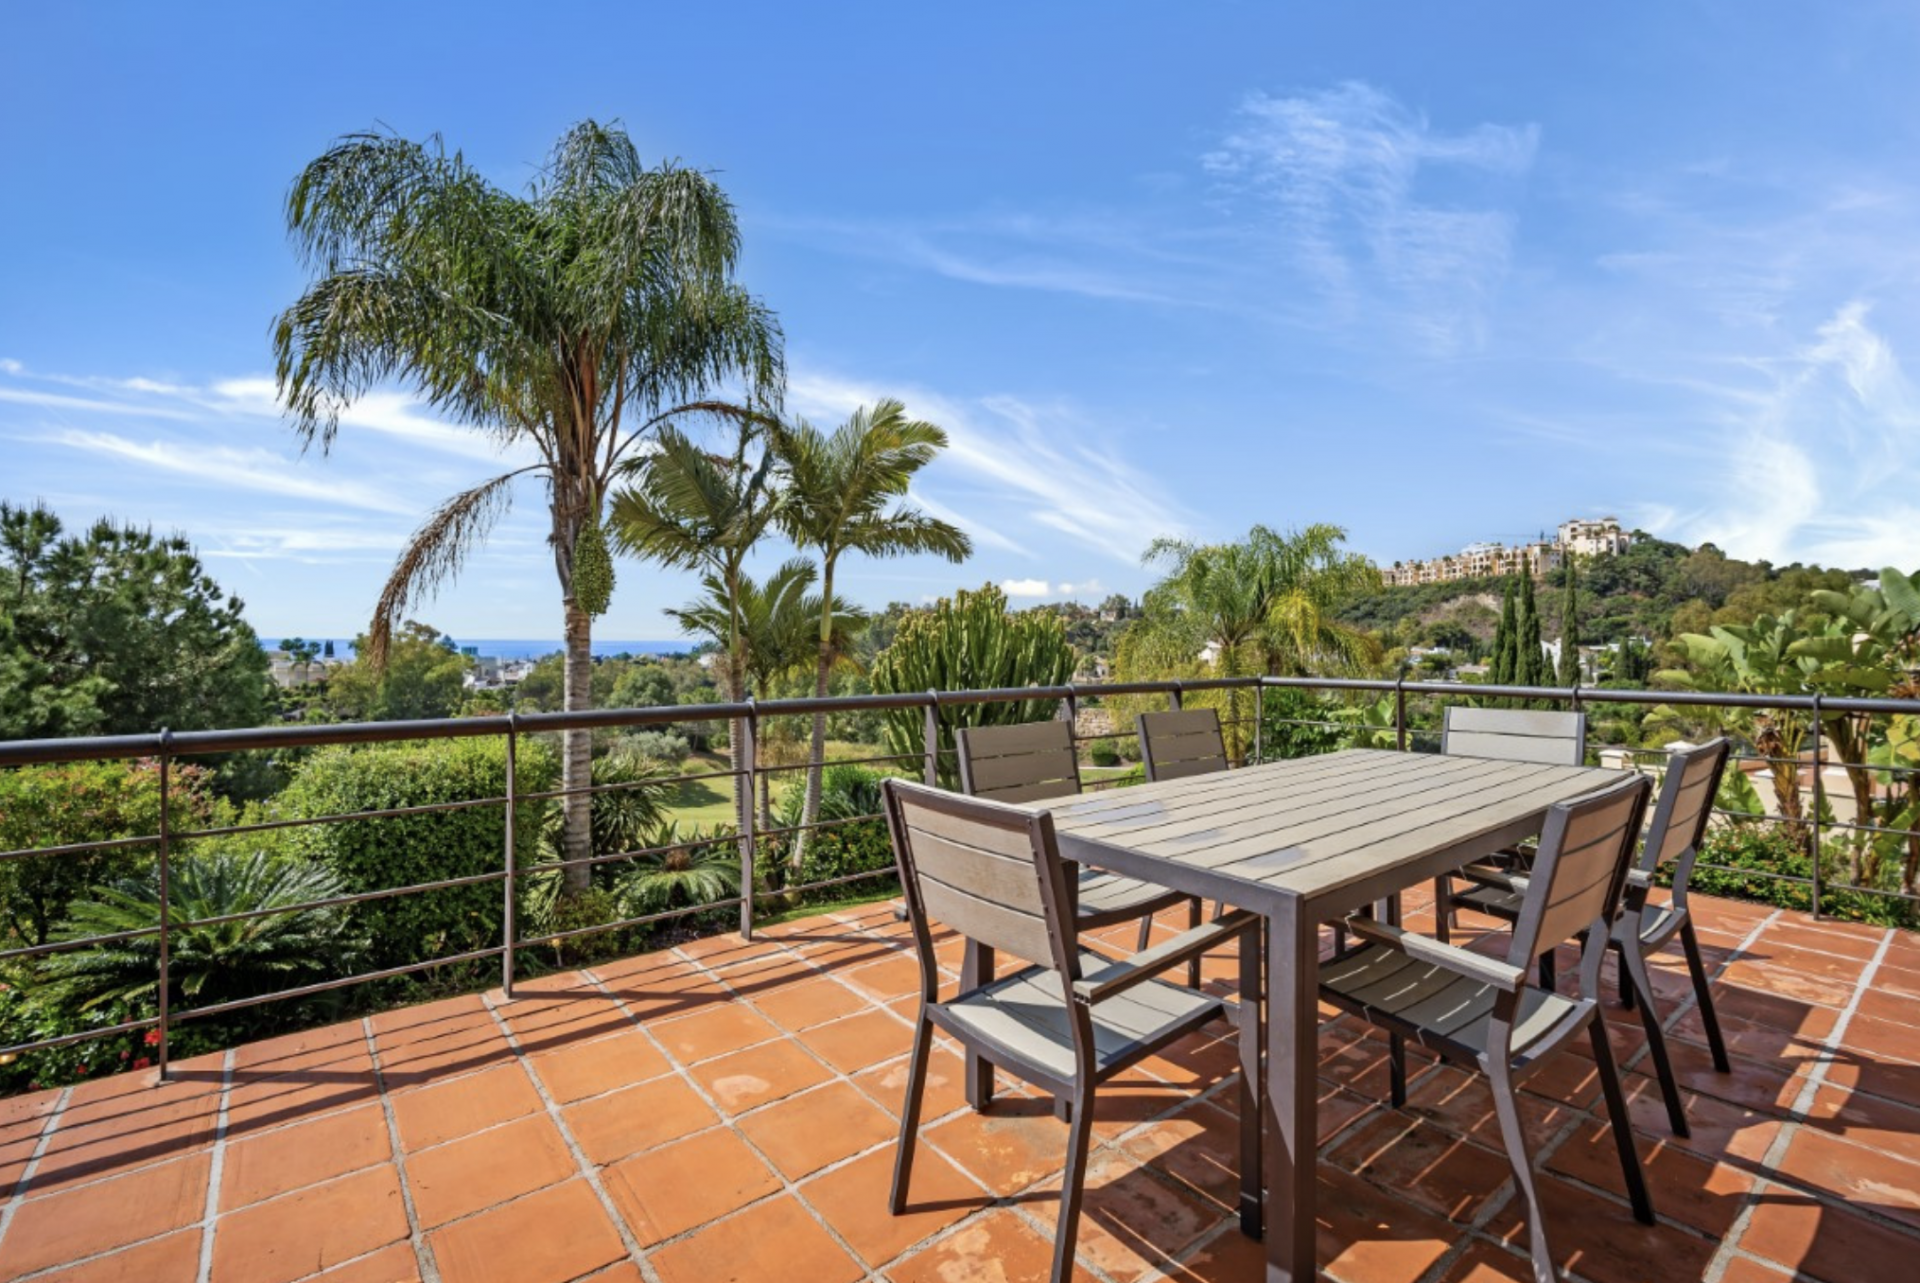 Fantastic five bedroom, south facing villa with lovely views to the sea and golf course in La Quinta